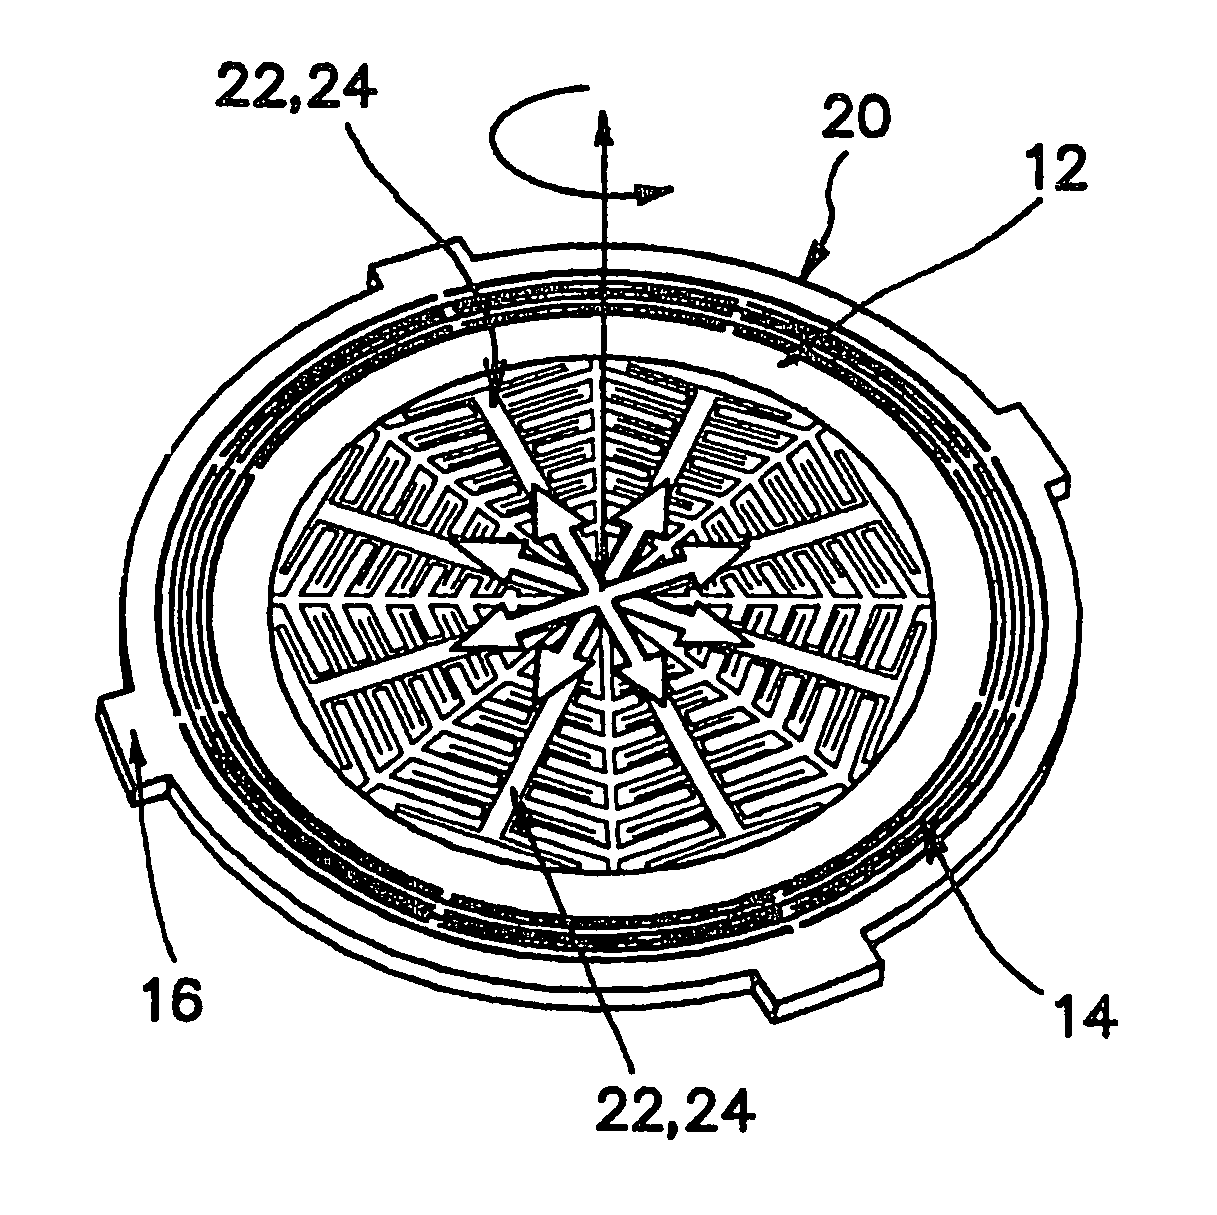 Method of simultaneously and directly generating an angular position and angular velocity measurement in a micromachined gyroscope